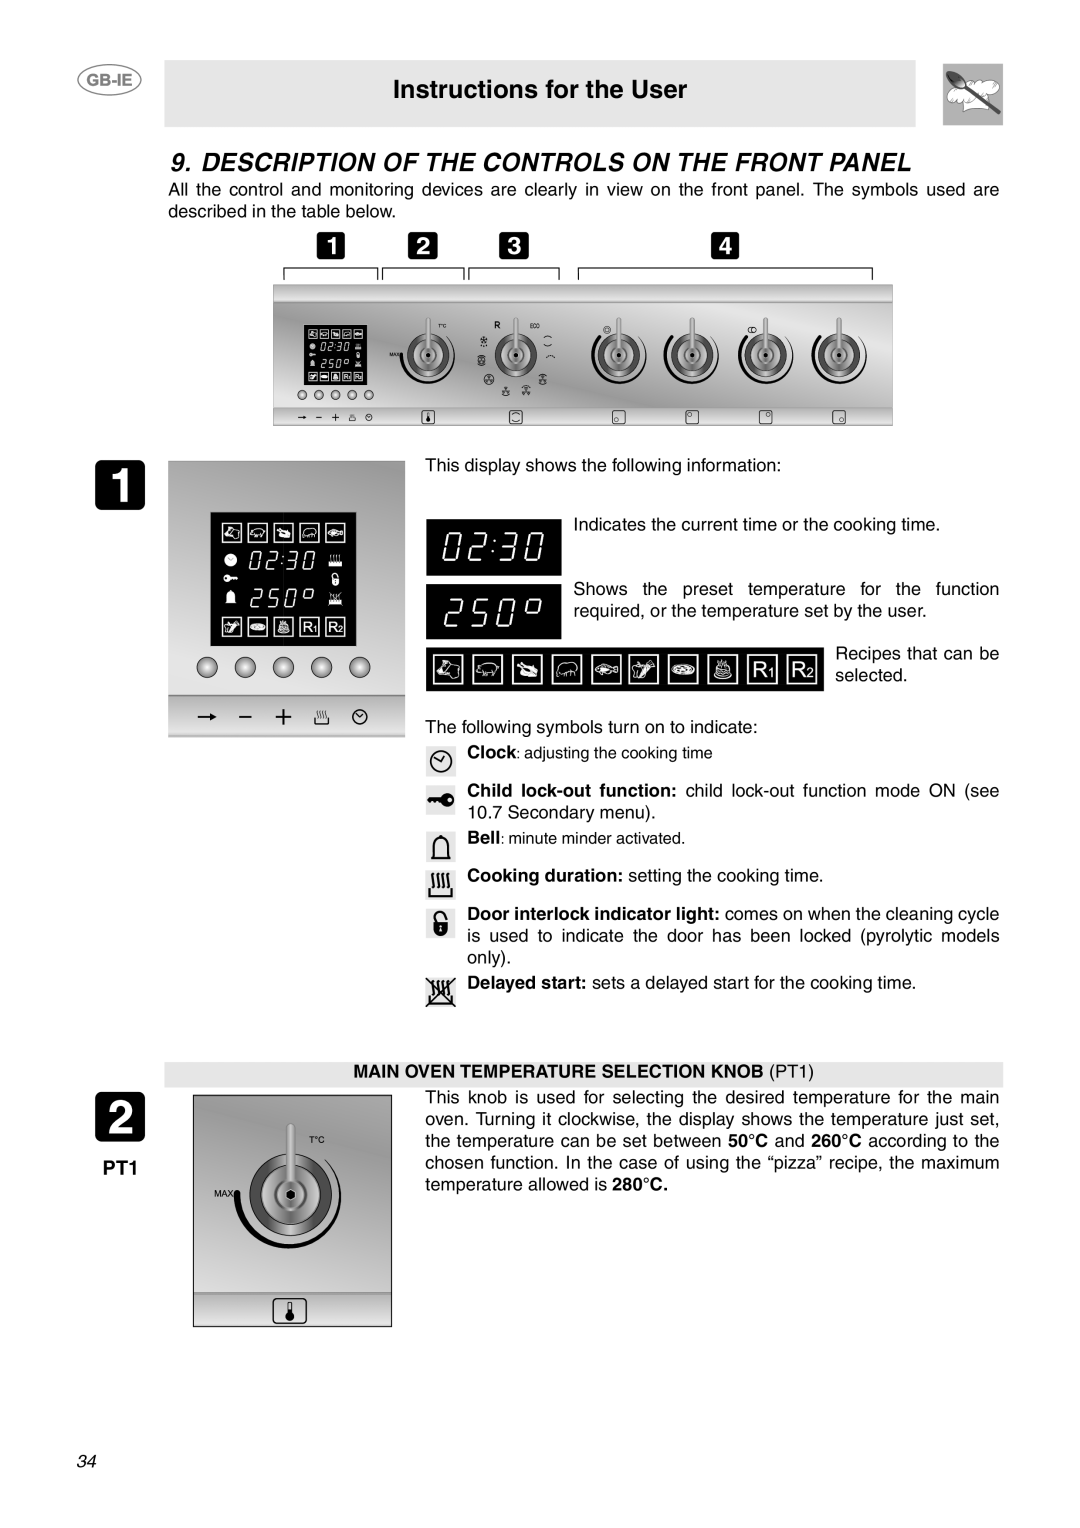 Smeg CE6CMX manual Description Of The Controls On The Front Panel, Instructions for the User 